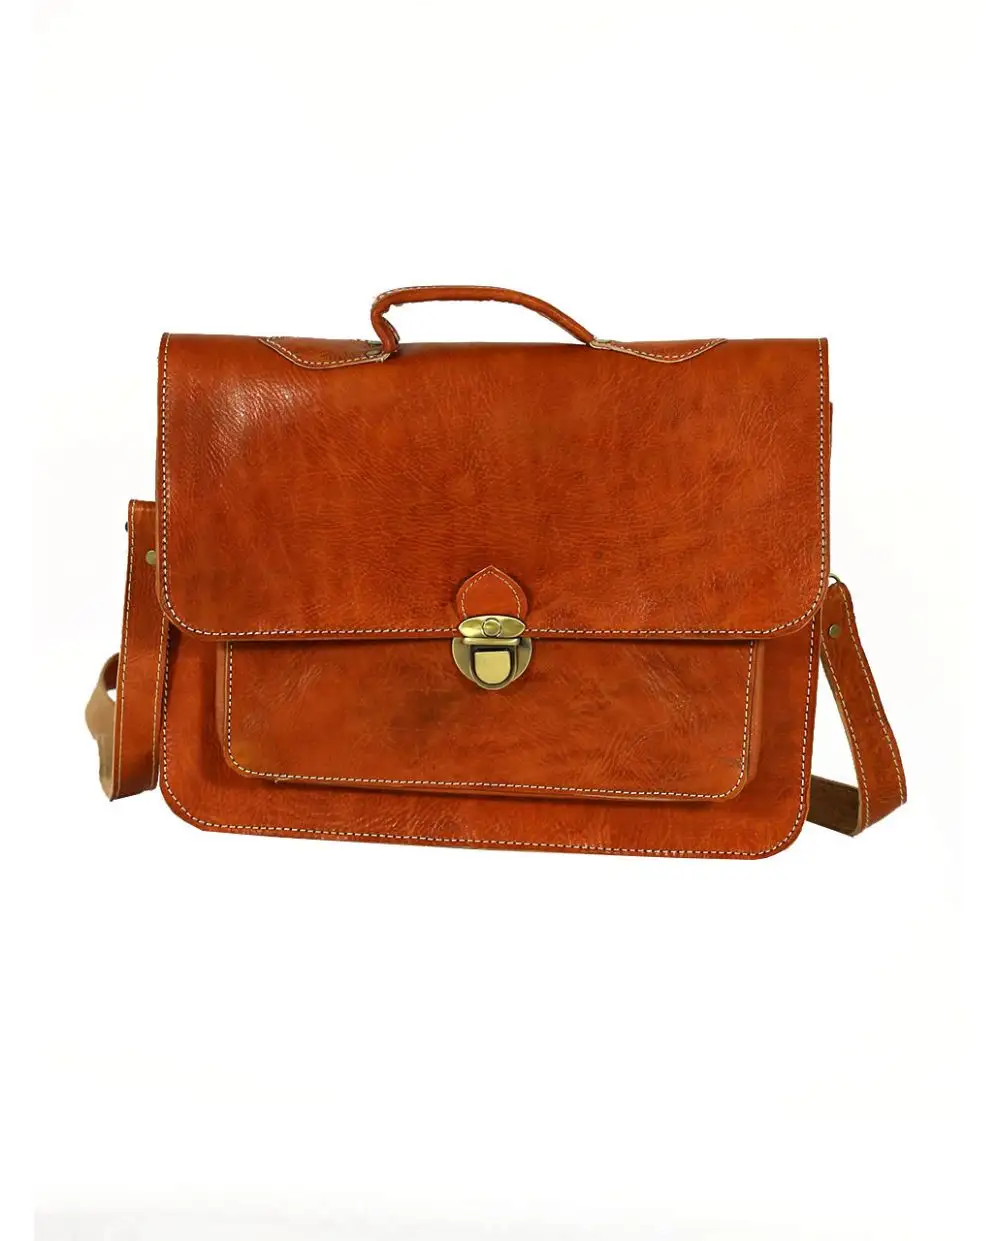 Moroccan handmade calfskin leather satchel briefcase for ladies and men leather briefcase entirely handmade by our craftsman